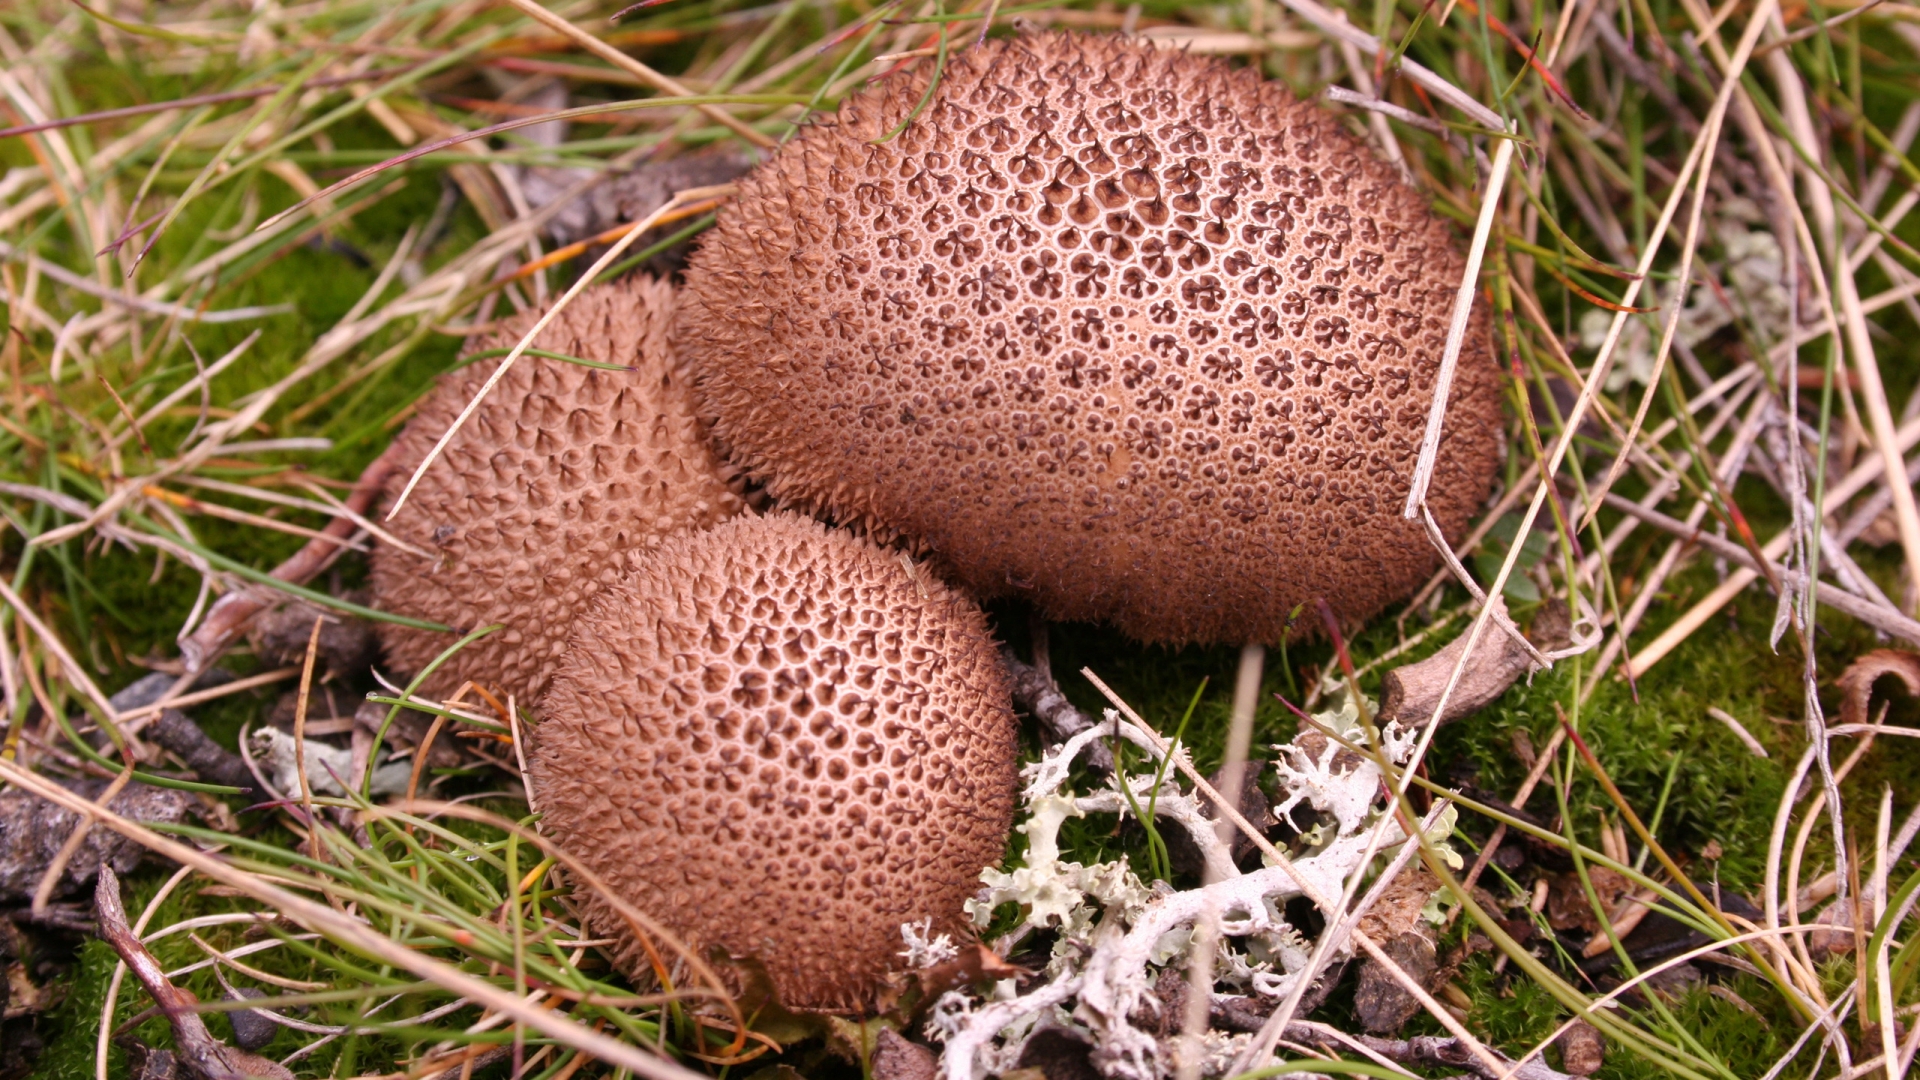 Umber brown puffball for 1920 x 1080 HDTV 1080p resolution